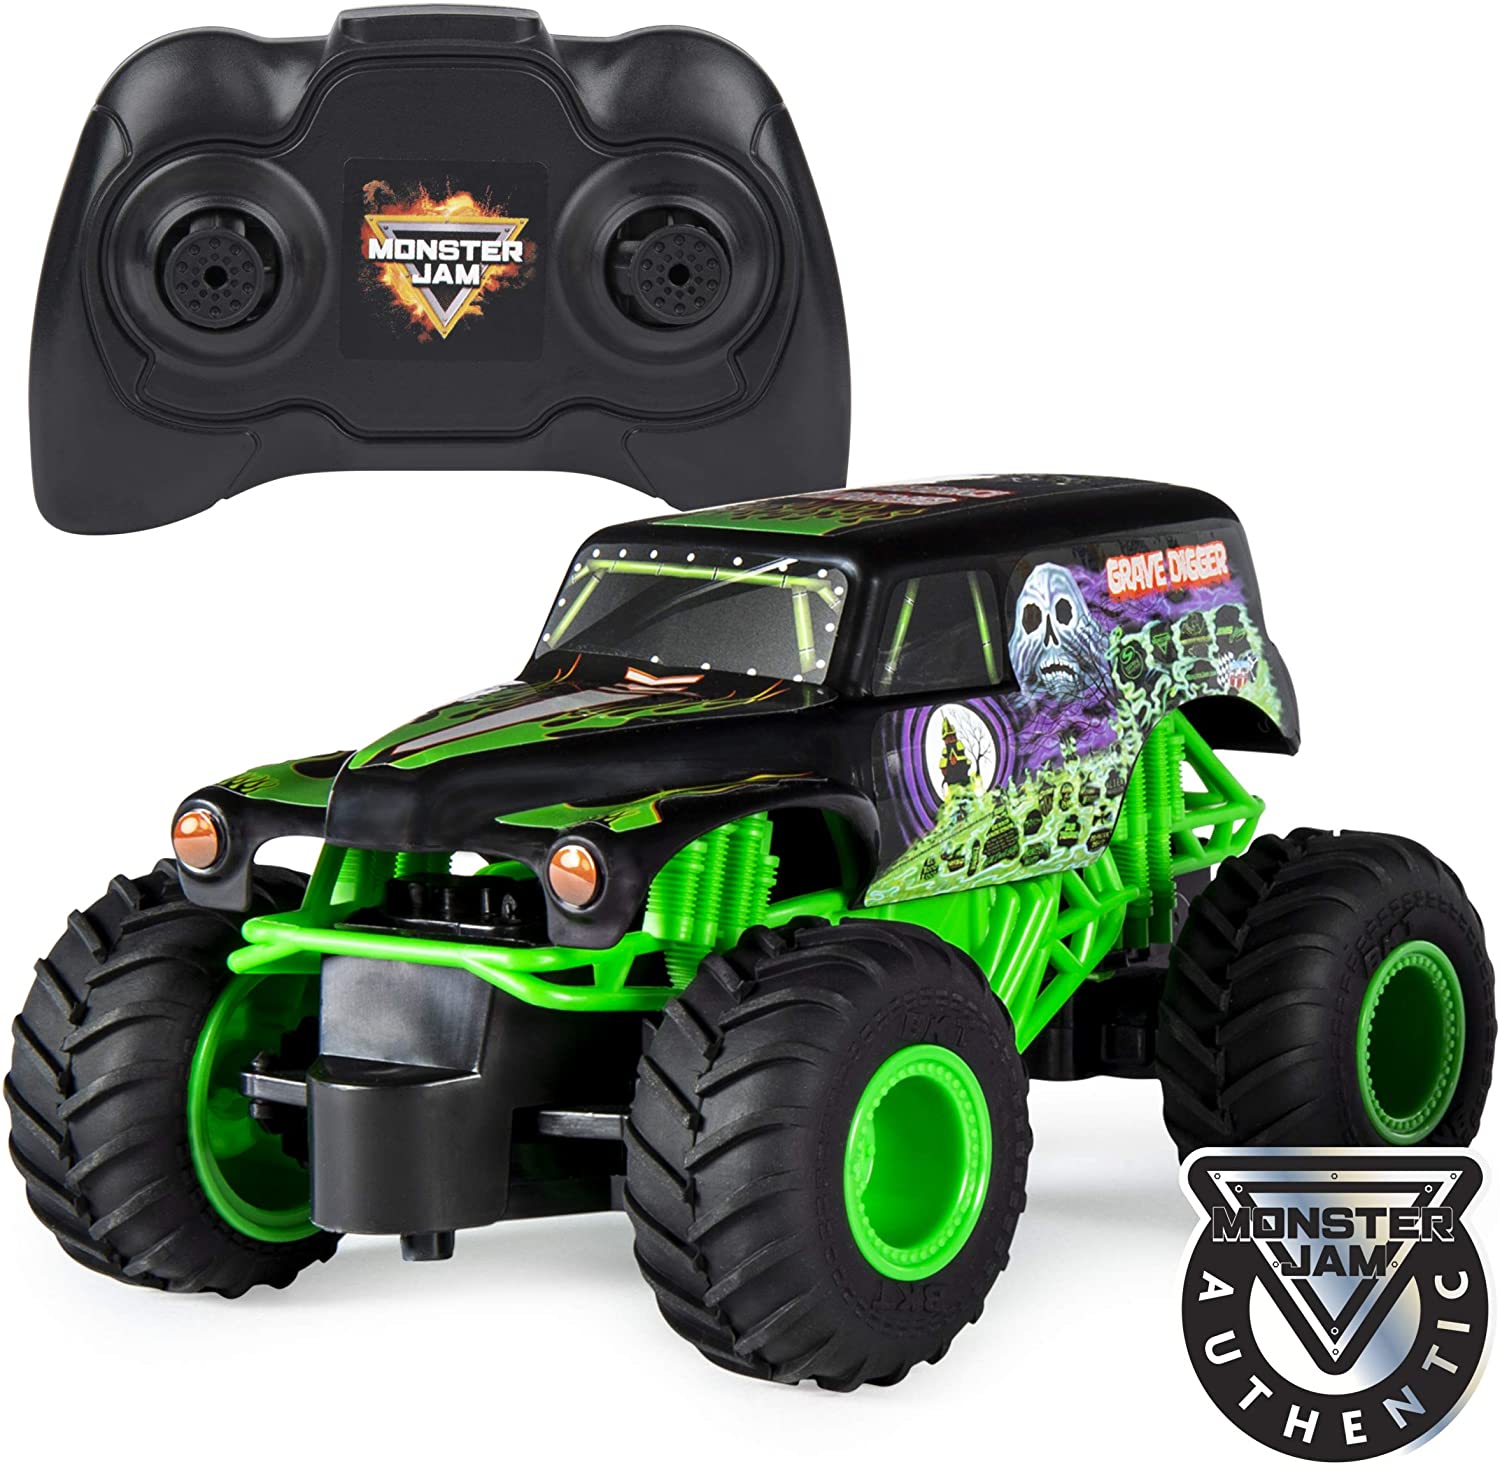 Monster Jam Official Grave Digger Remote Control Monster Truck, 1:24 Scale, 2.4 GHz